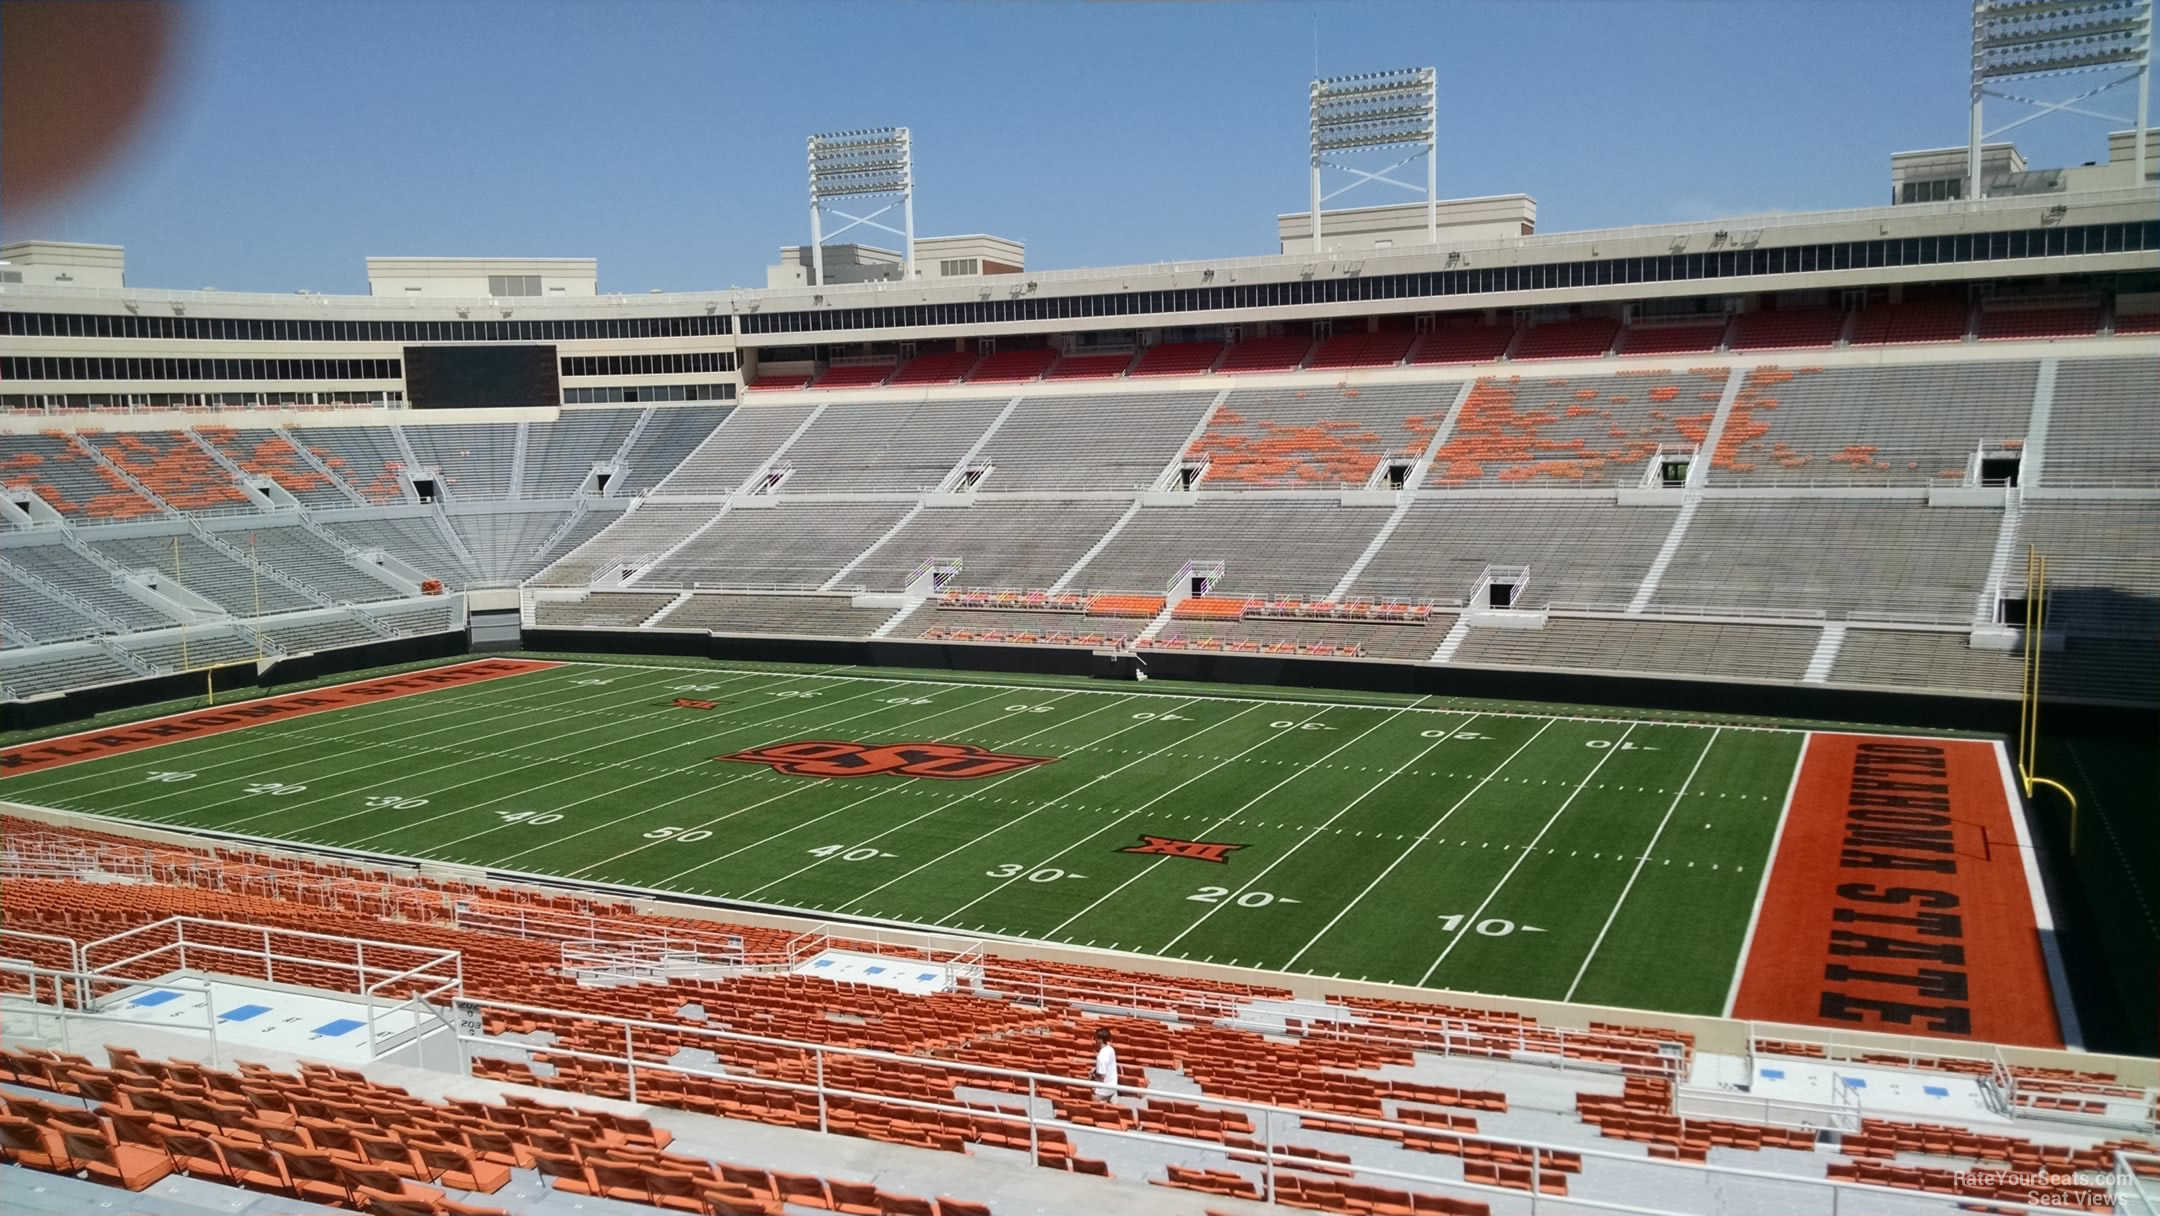 section 302, row 19 seat view  - boone pickens stadium